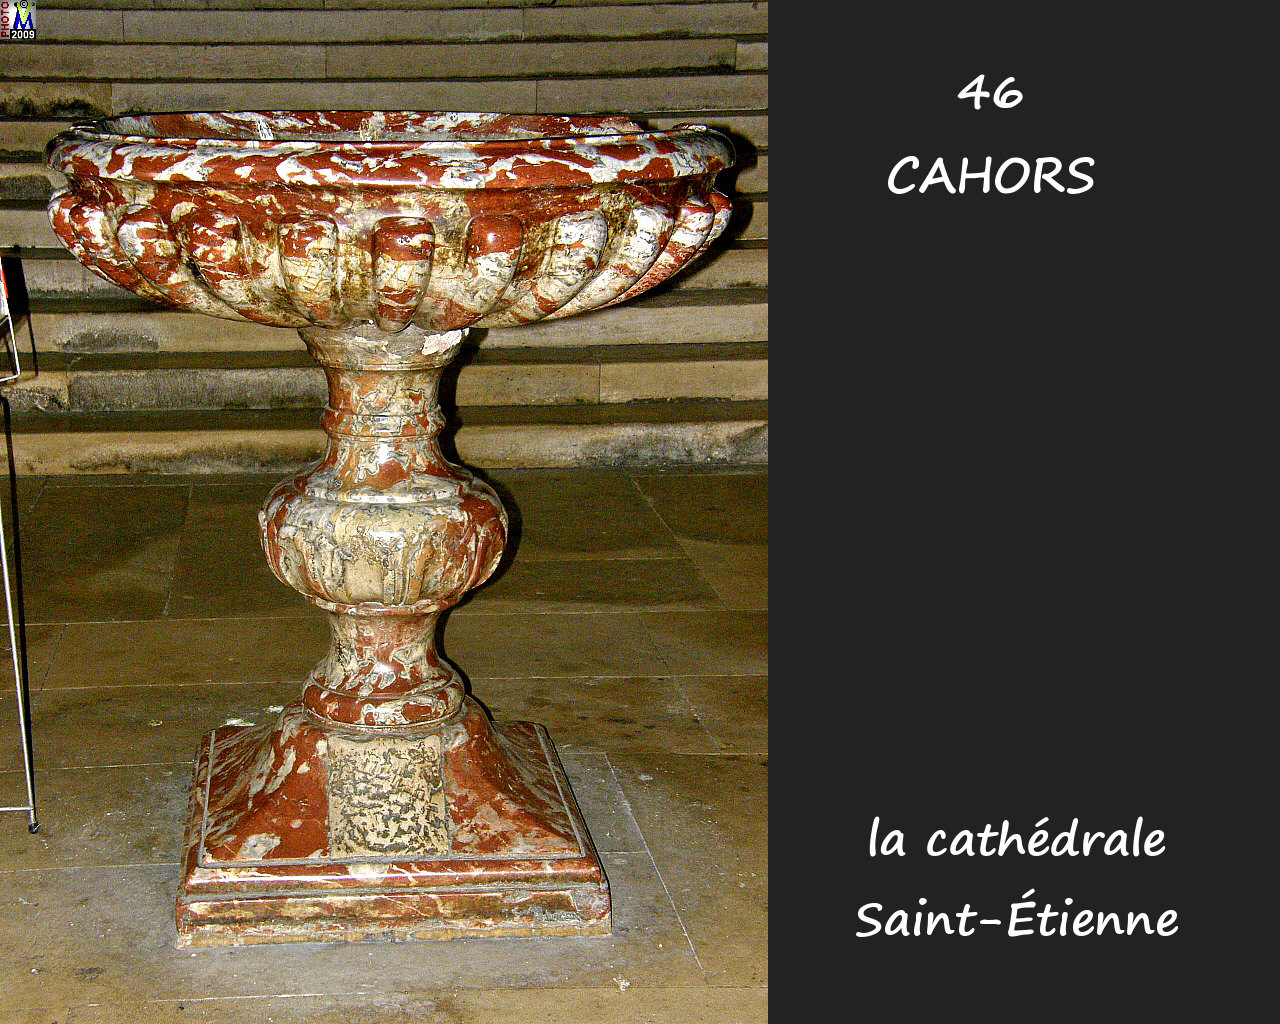 46CAHORS_cathedrale_250.jpg